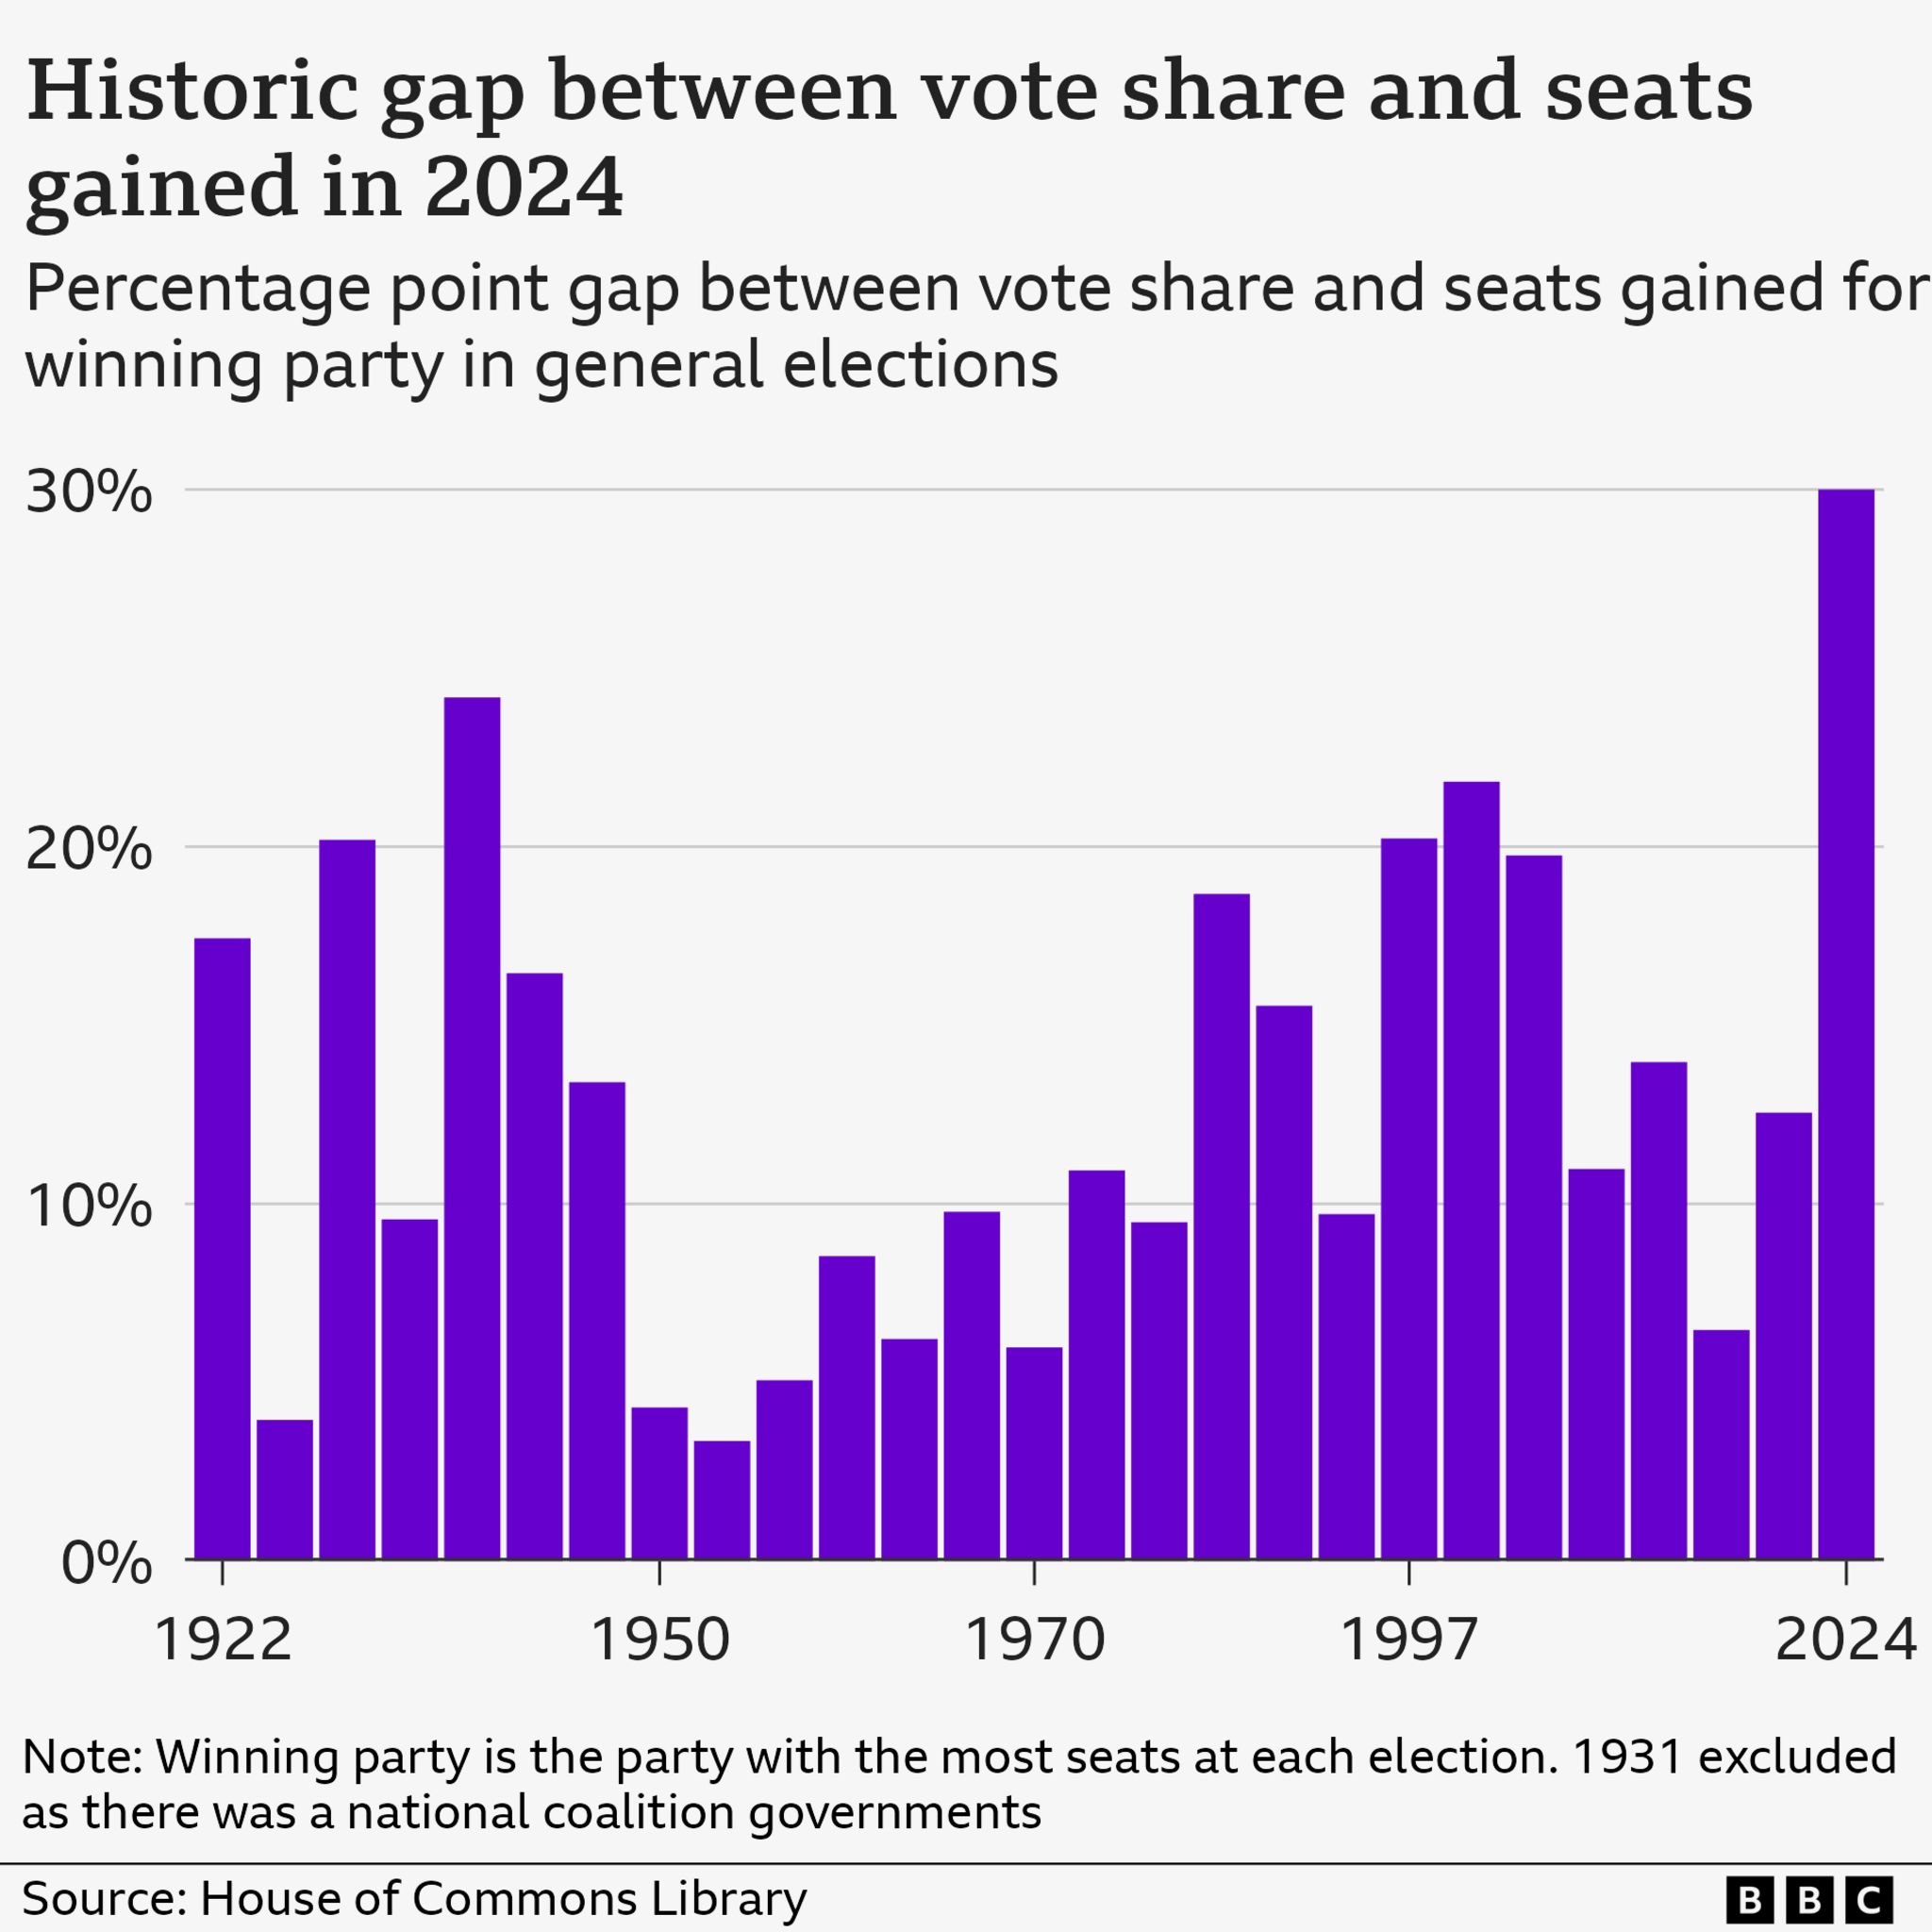 Graph showing the gap between the share of the votes and the share of the seats from 1922 to 2024, showing that 2024 has the highest gap at 30 percentage points, with the next highest being about 24% in the 1930s.